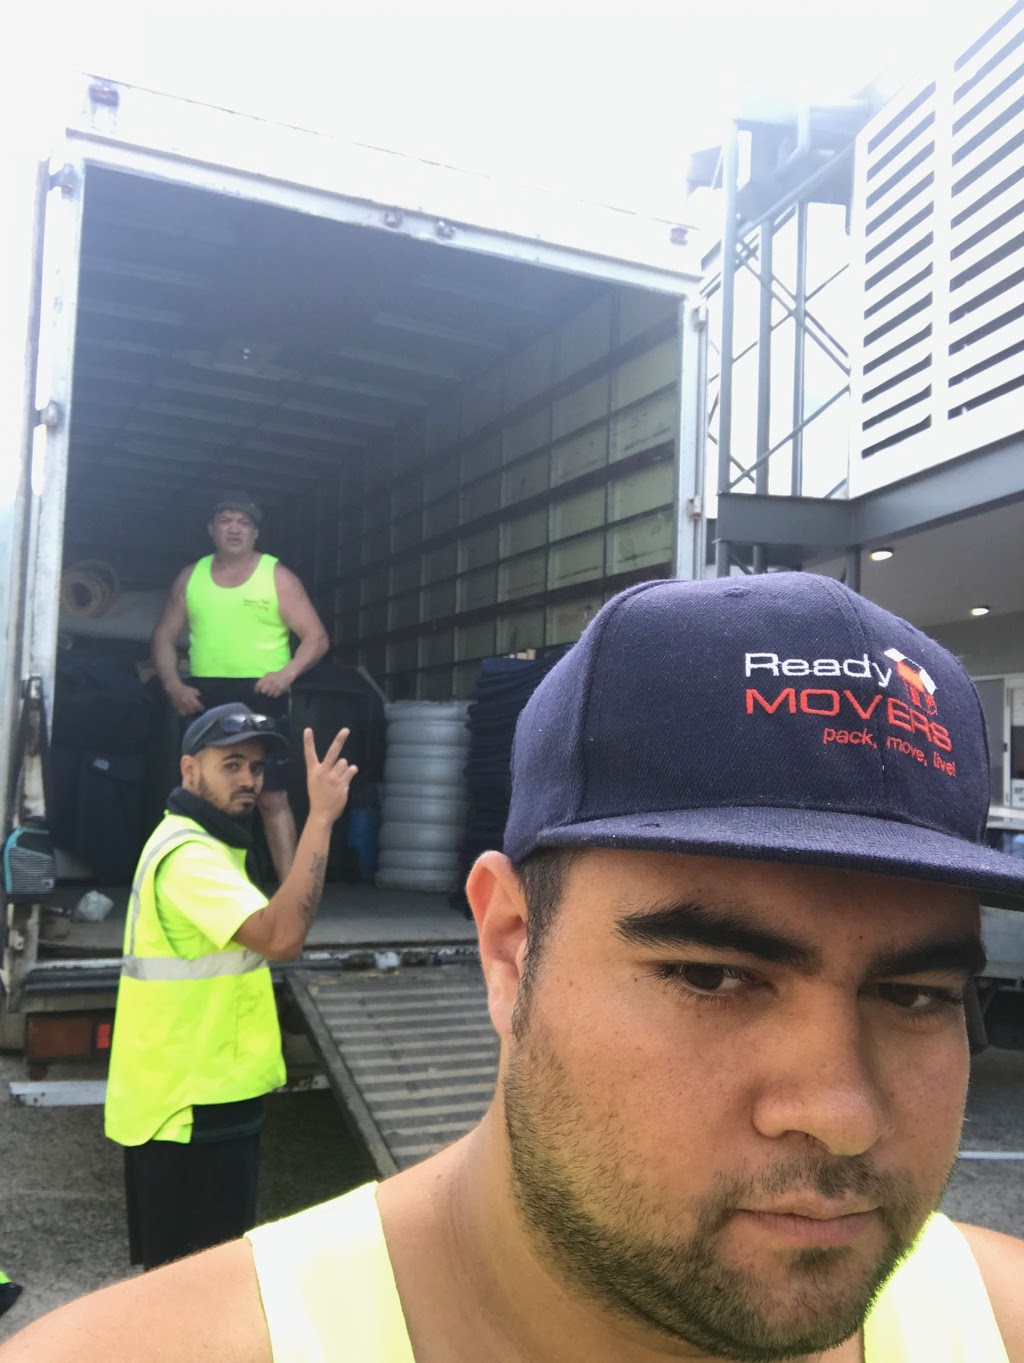 Ready movers Redcliffe | 6 Outlook Ct, Kallangur QLD 4503, Australia | Phone: 1300 787 934